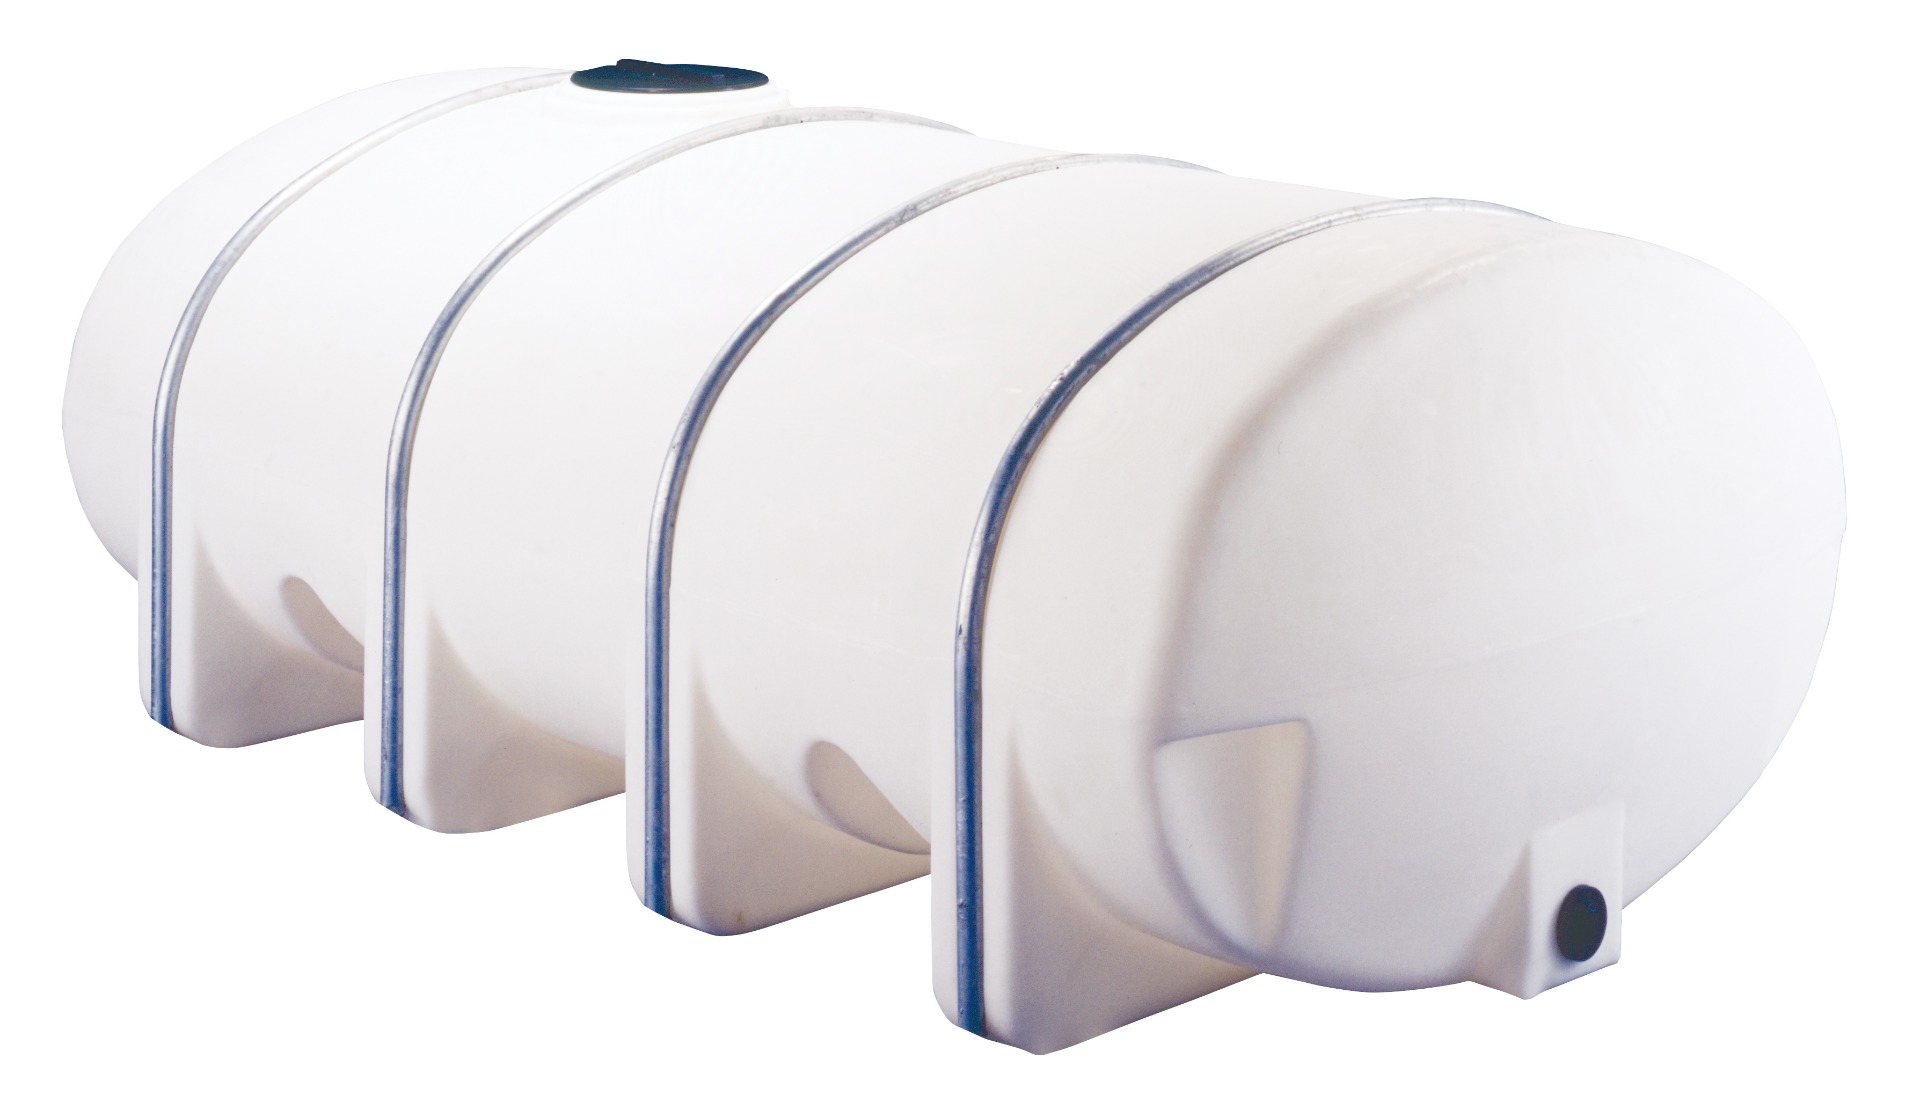 Buy 3135 Gallon Plastic Horizontal Elliptical Leg Tank in White by Norwesco of White color for only $7,038.00